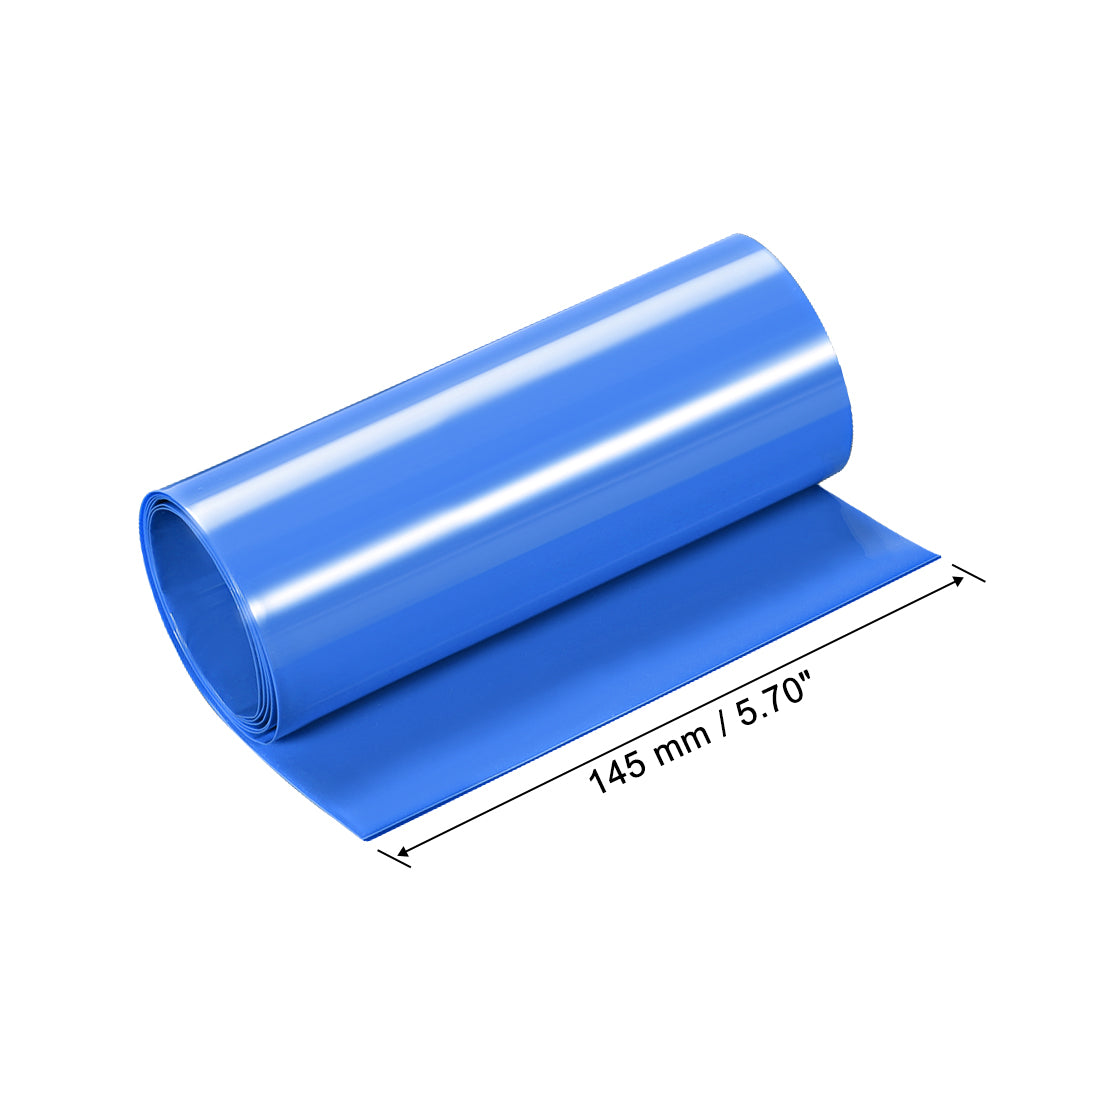 Uxcell Uxcell PVC Heat Shrink Tube 145mm Flat Width Wrap for Dual Layer 1 Meter Blue